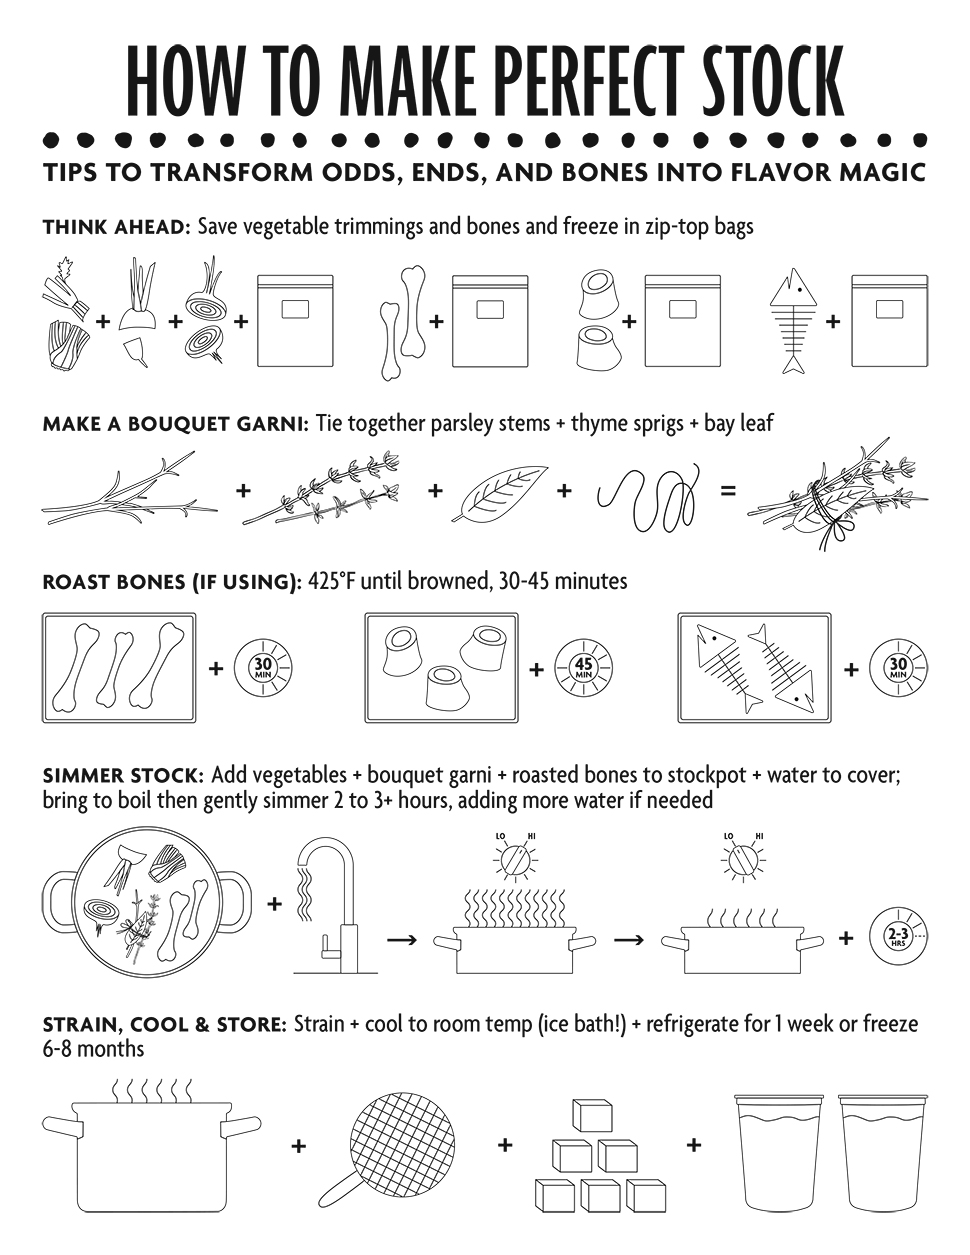 a visual infographic about how to make stock, including what roasting ingredients, making an herb bouquet, simmering stock, and straining to save for future use